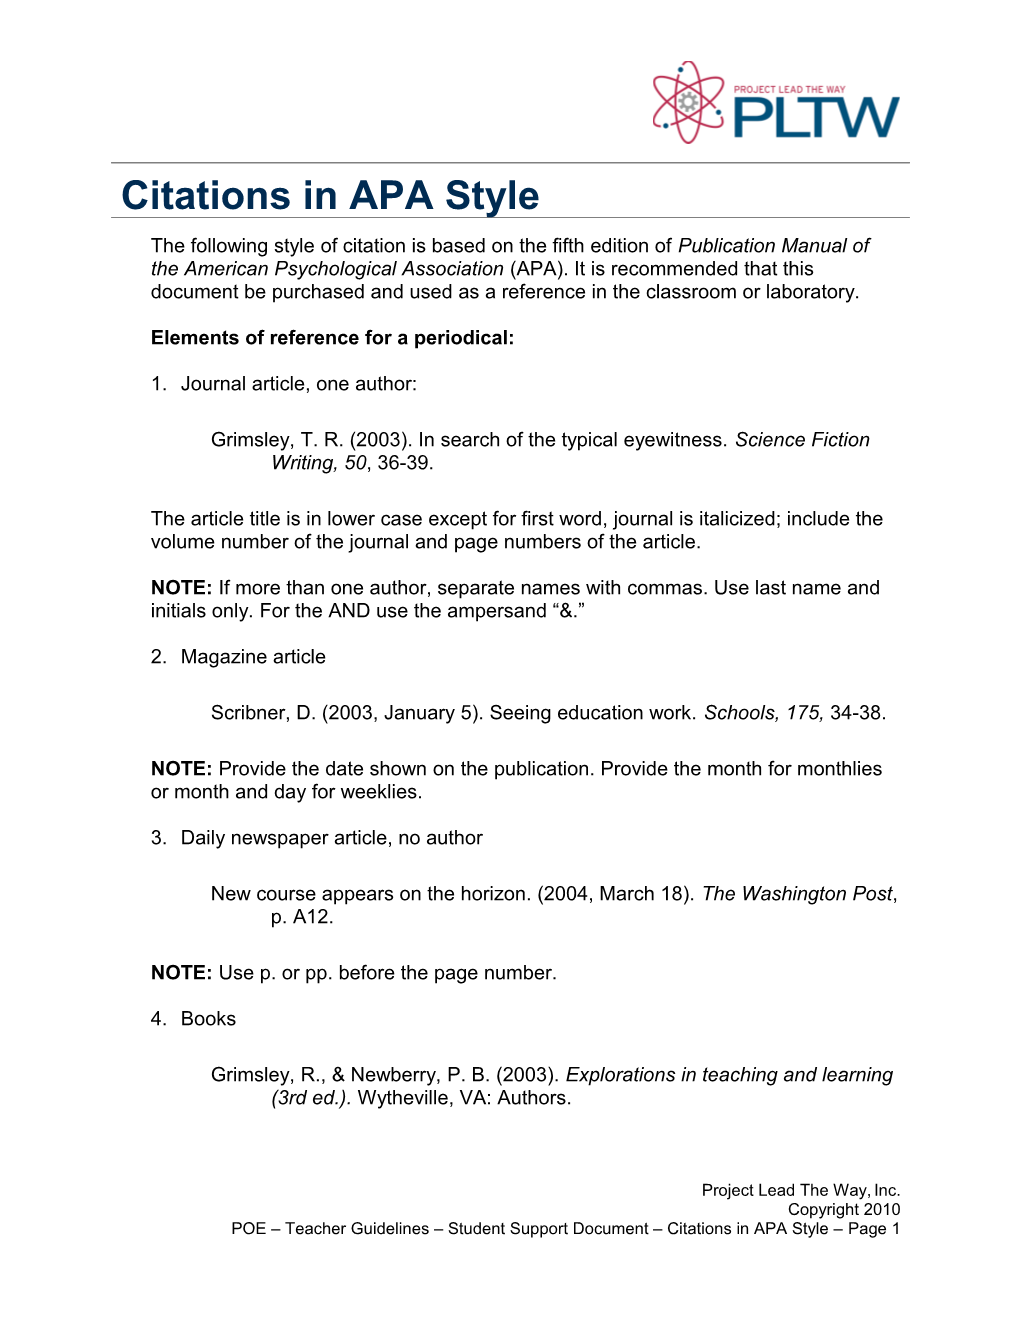 Citations in APA Style